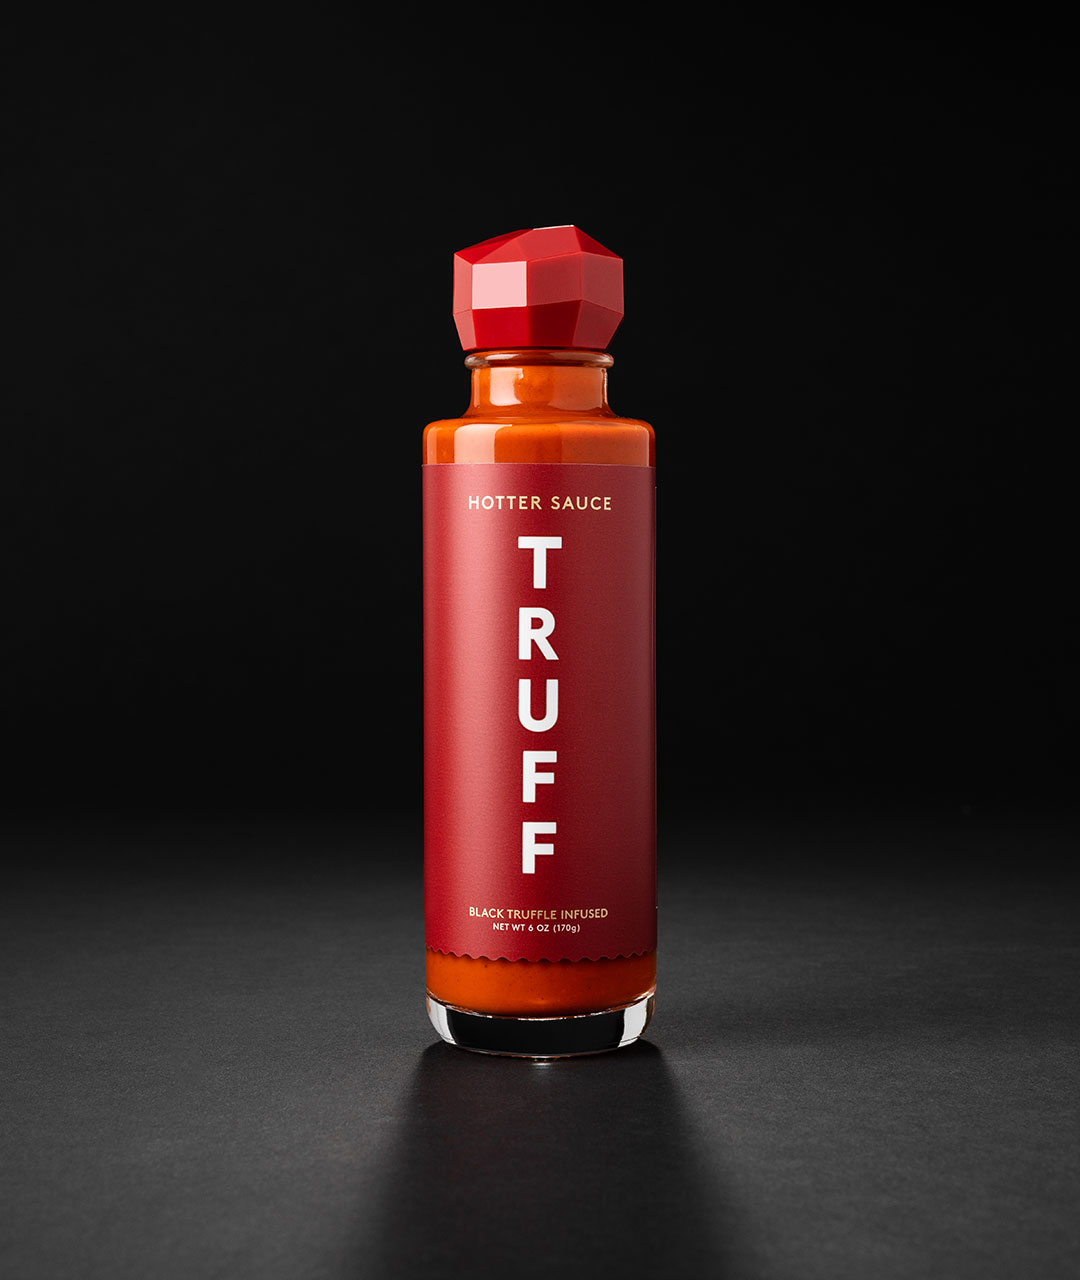 Truff Hot Sauce Packaging Design by Colony